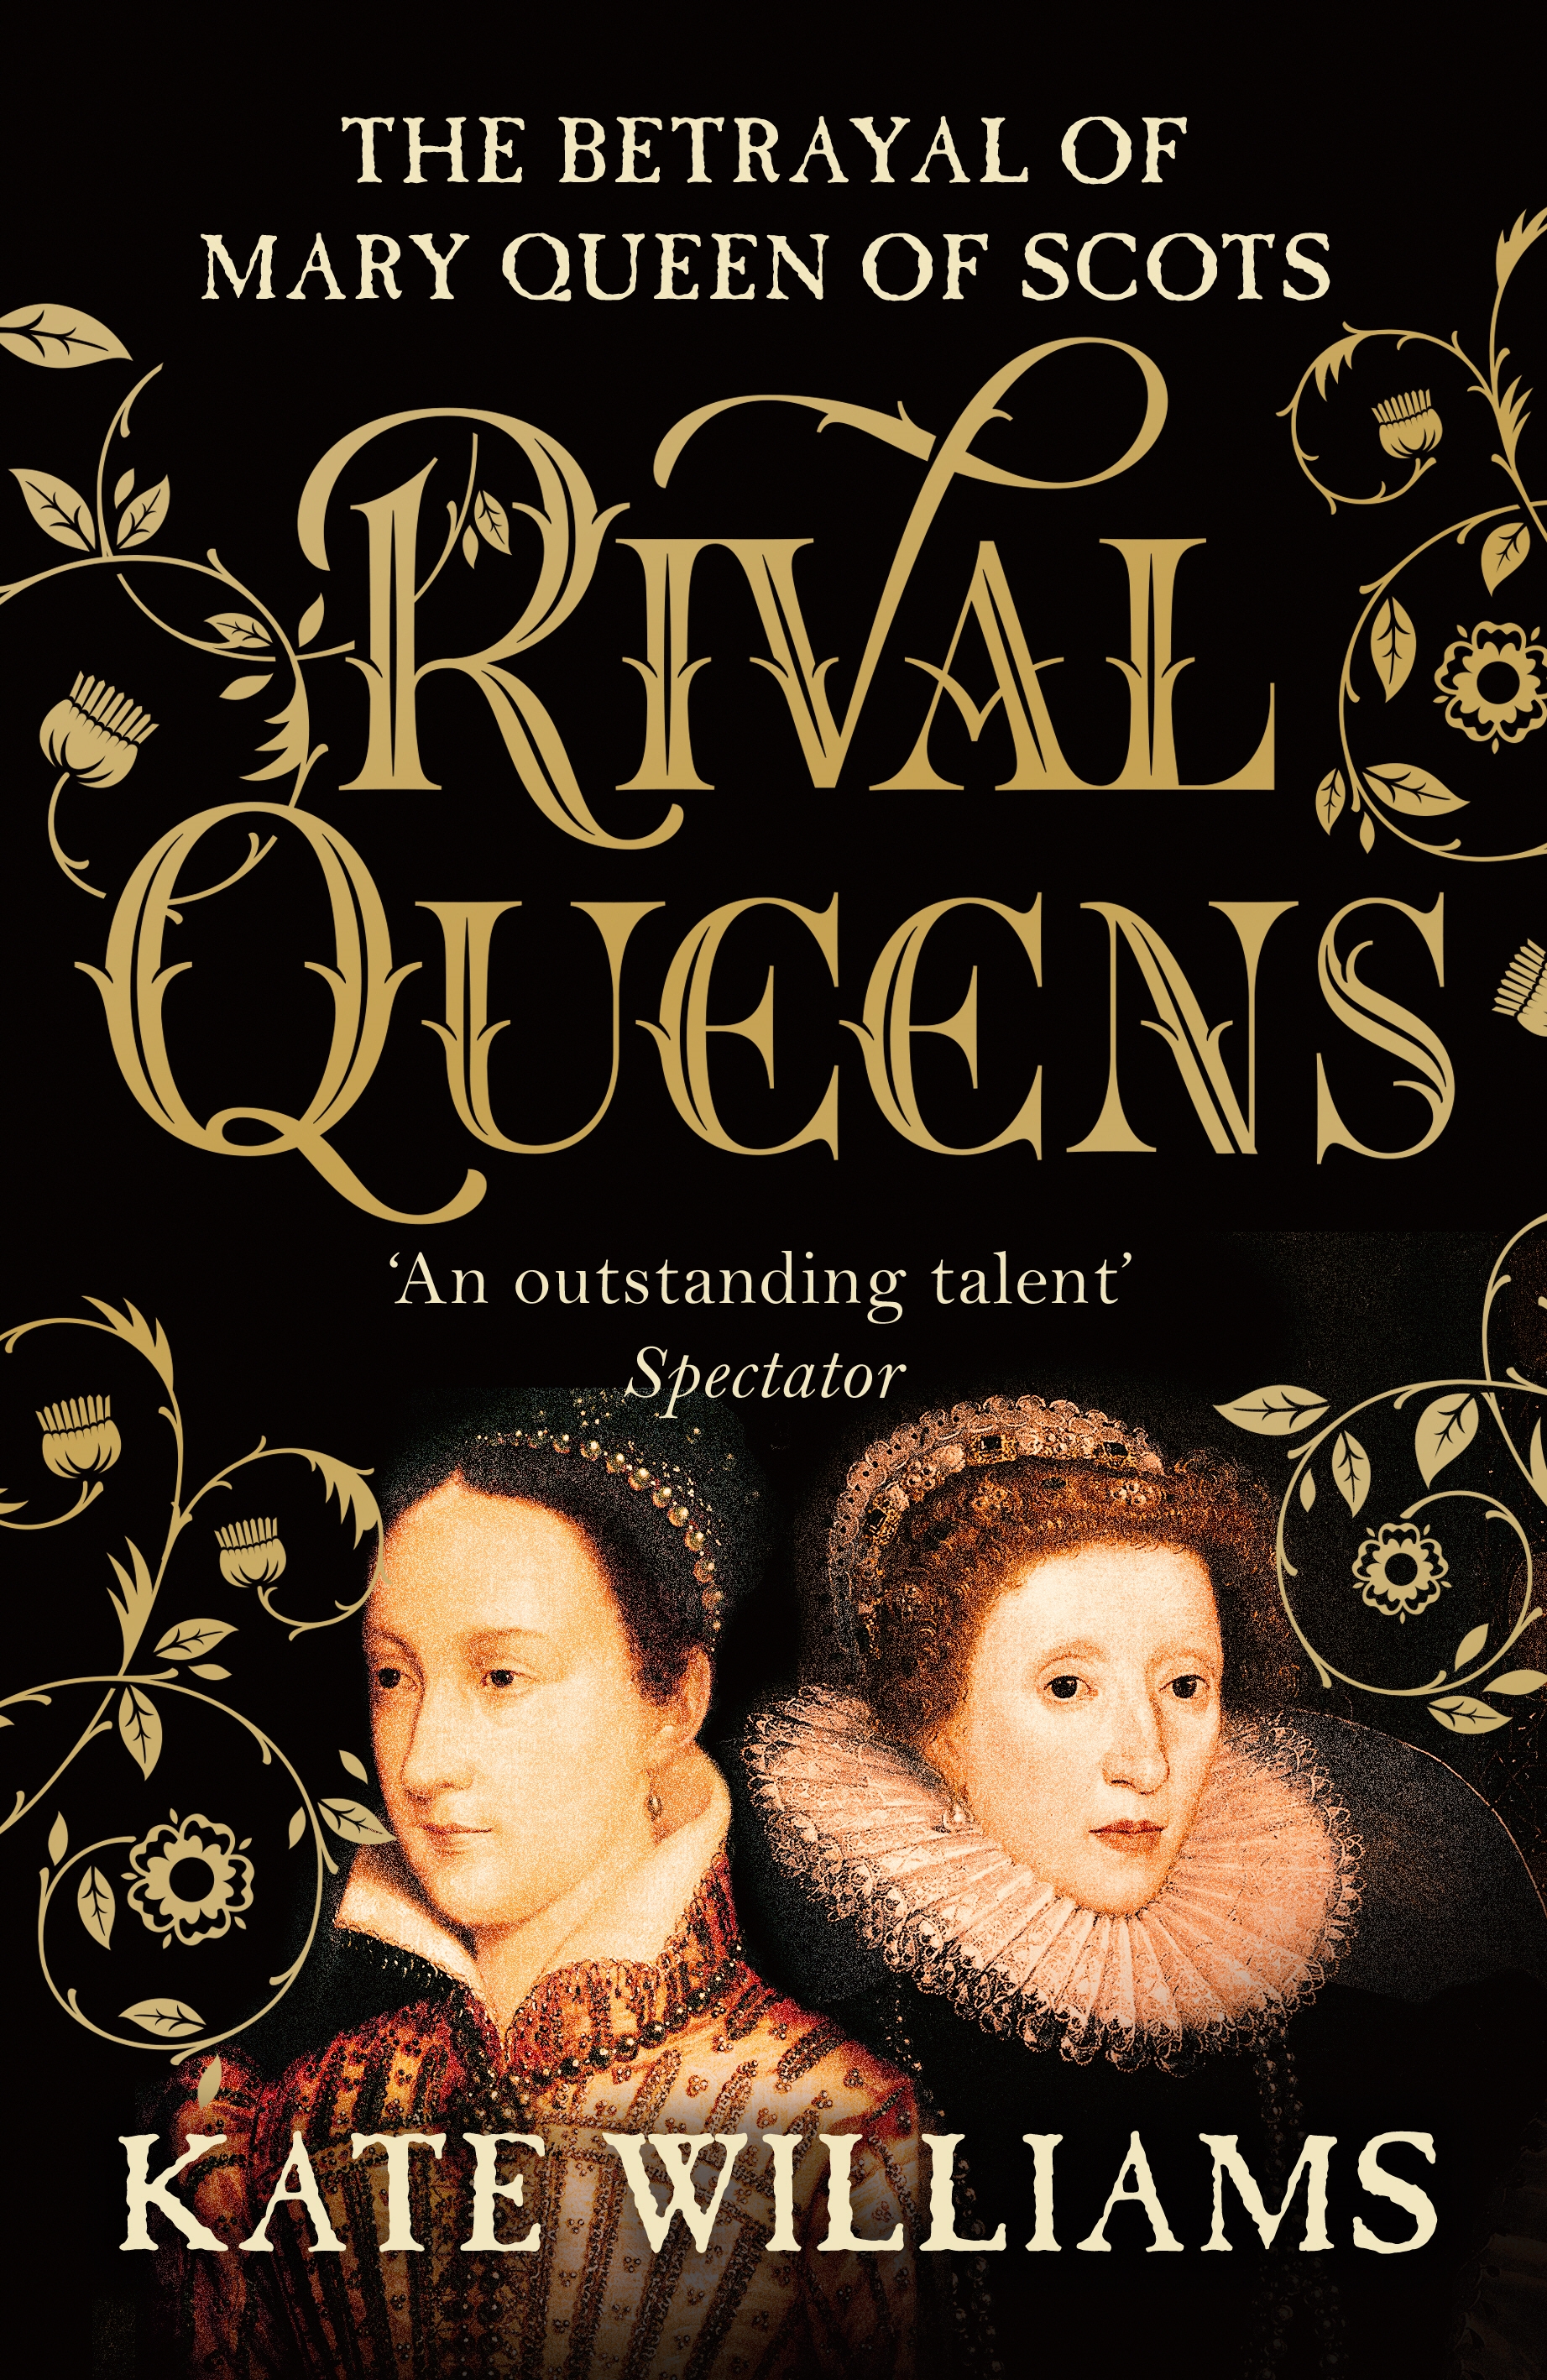 The rival queens pdf free download pdf